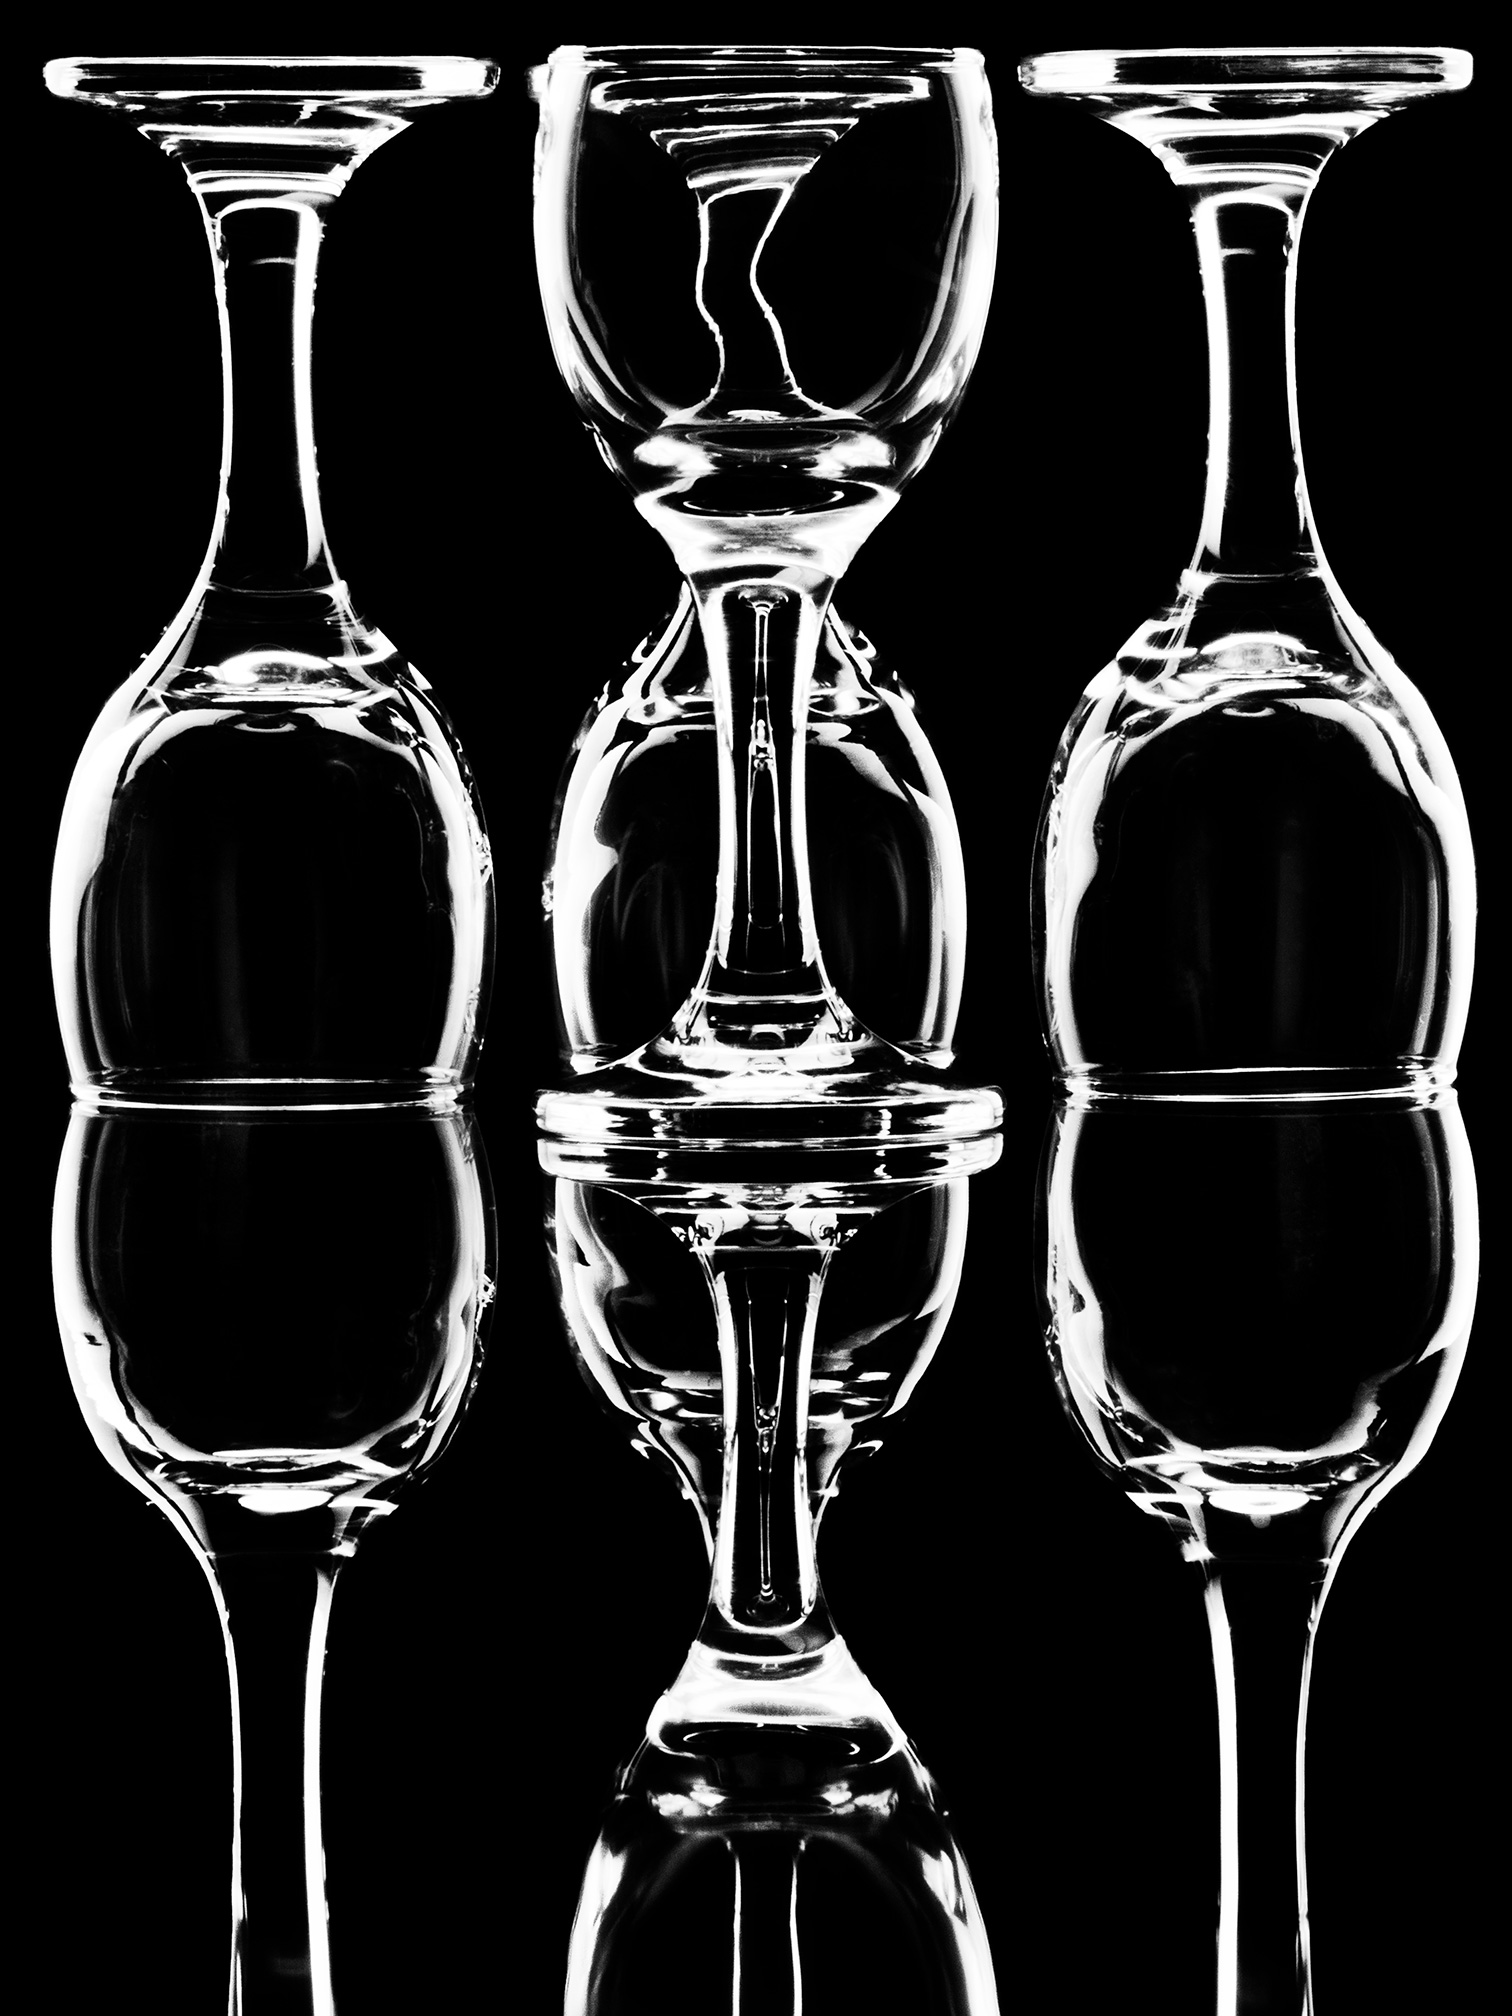 Set of Glassware photographed to show reflection on clear surface, dark background